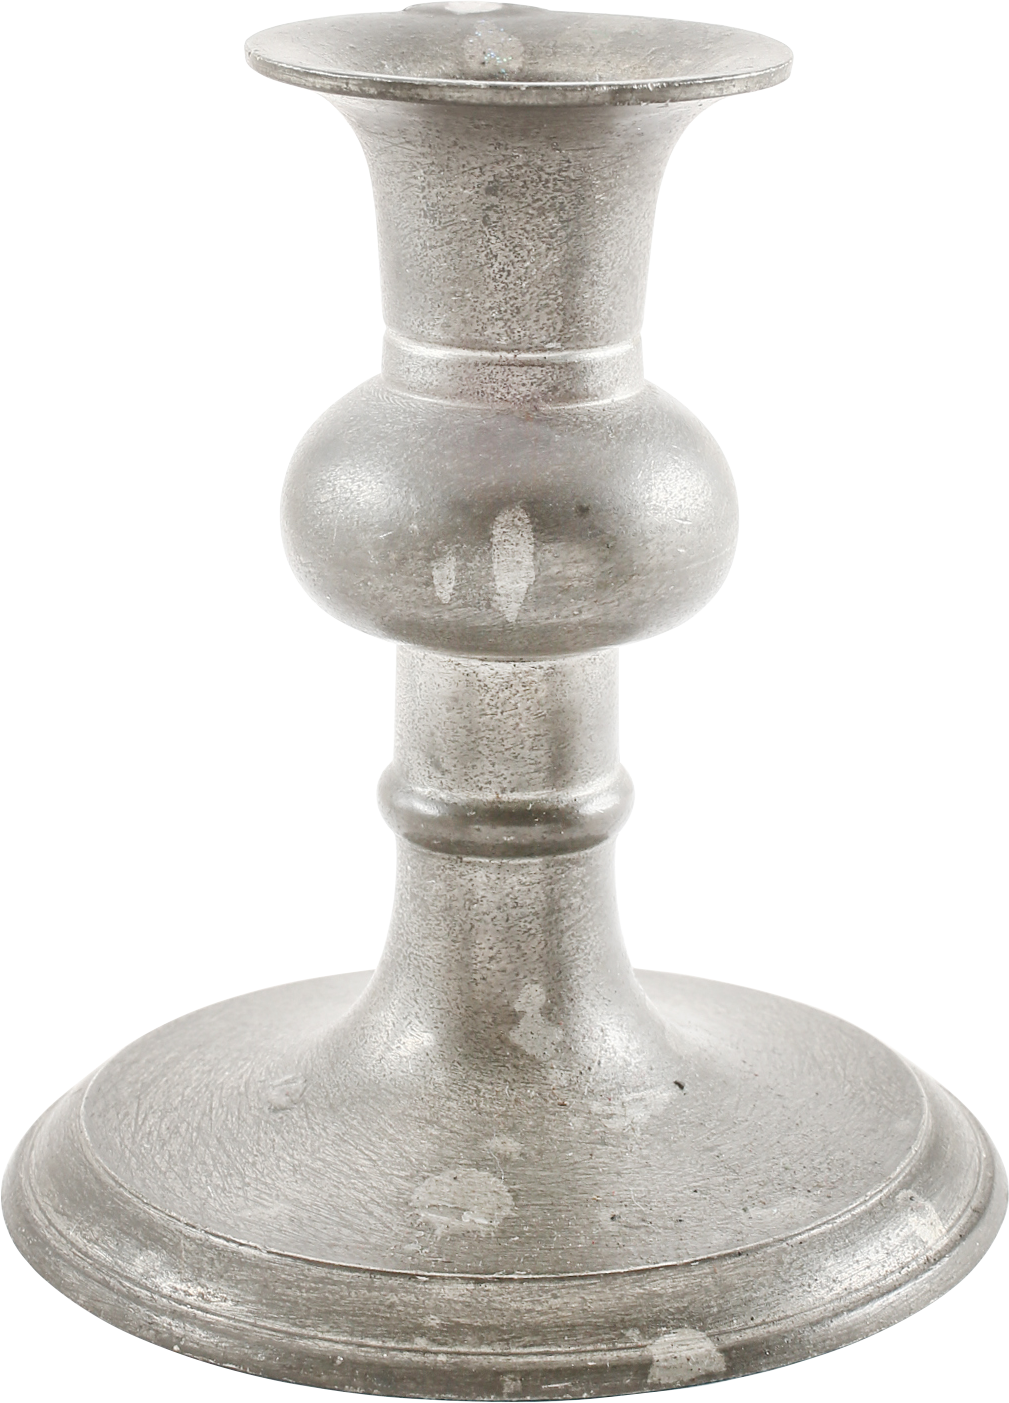 ENGLISH PEWTER CANDLE STICK FROM THE MOVIES - Fagan Arms